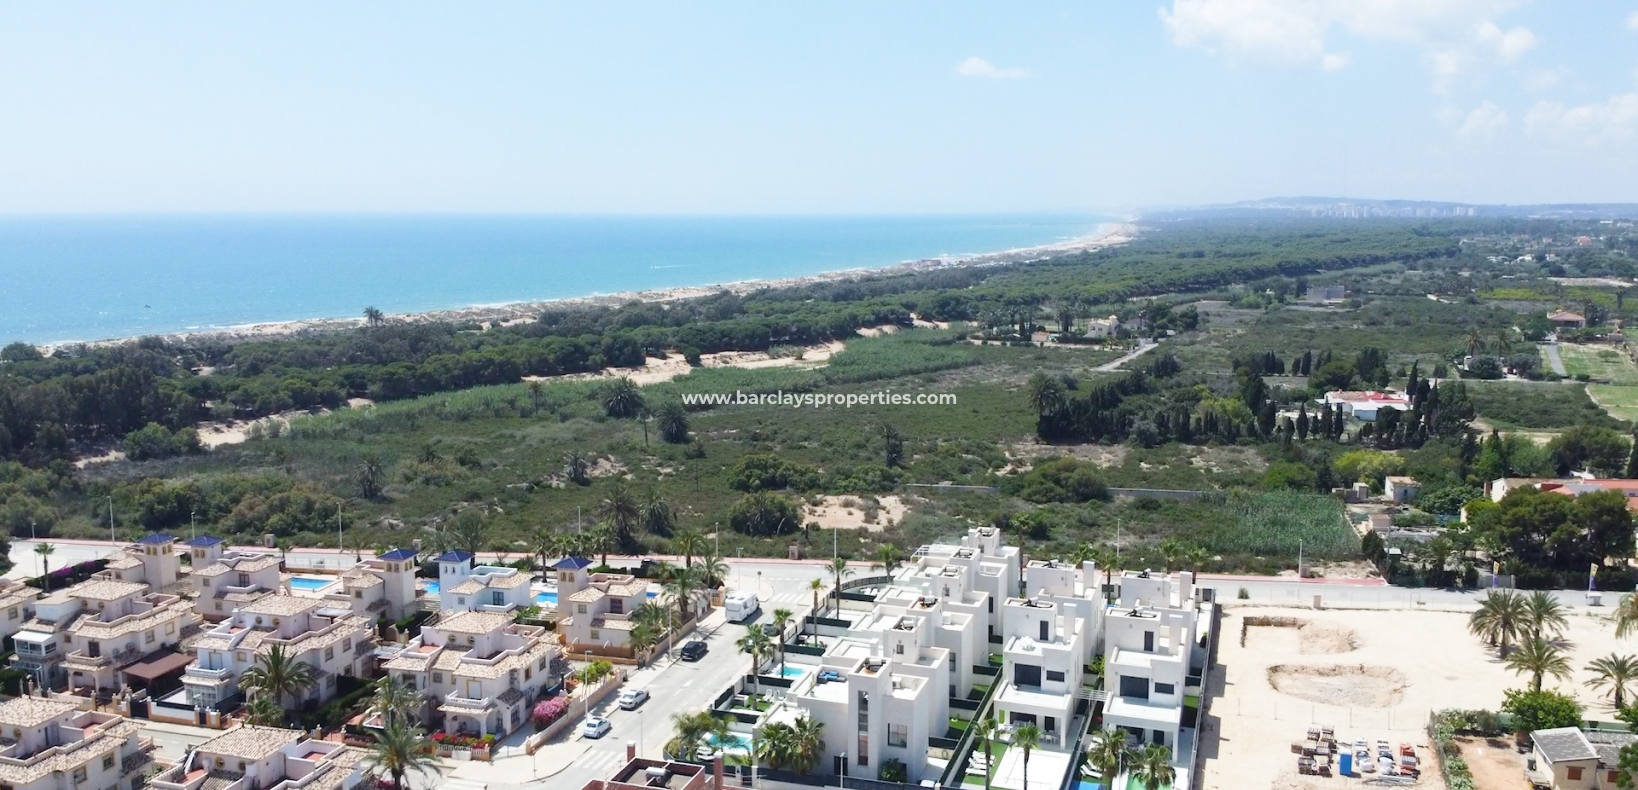 Detached Property for sale in La Marina